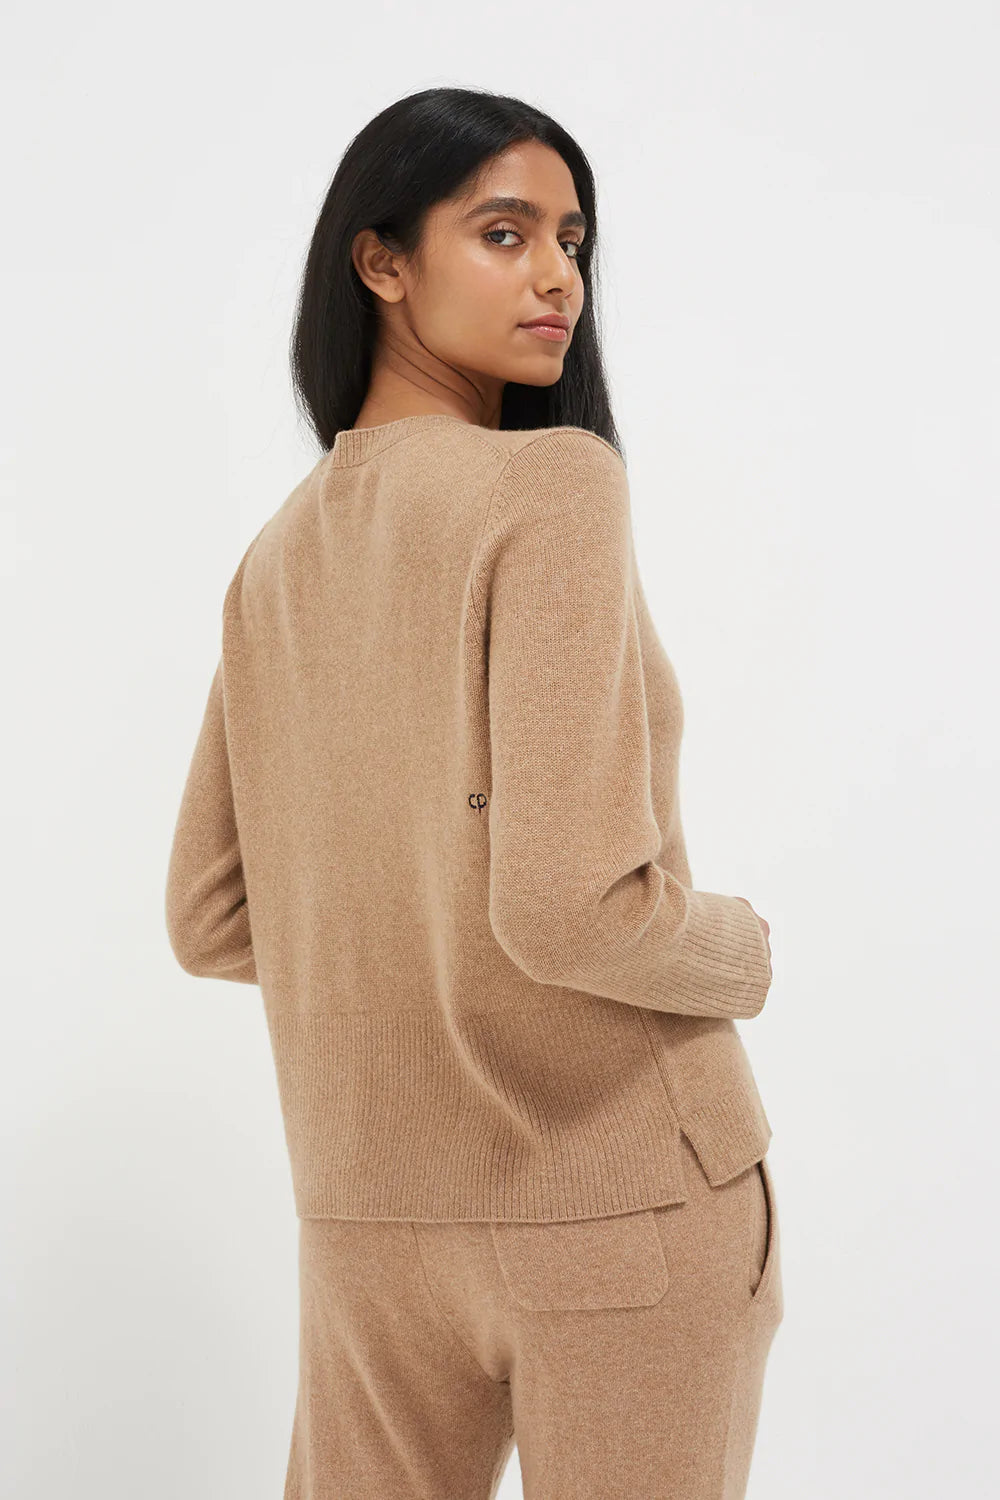 Cashmere Boxy Sweater - Camel - Frontiers Woman